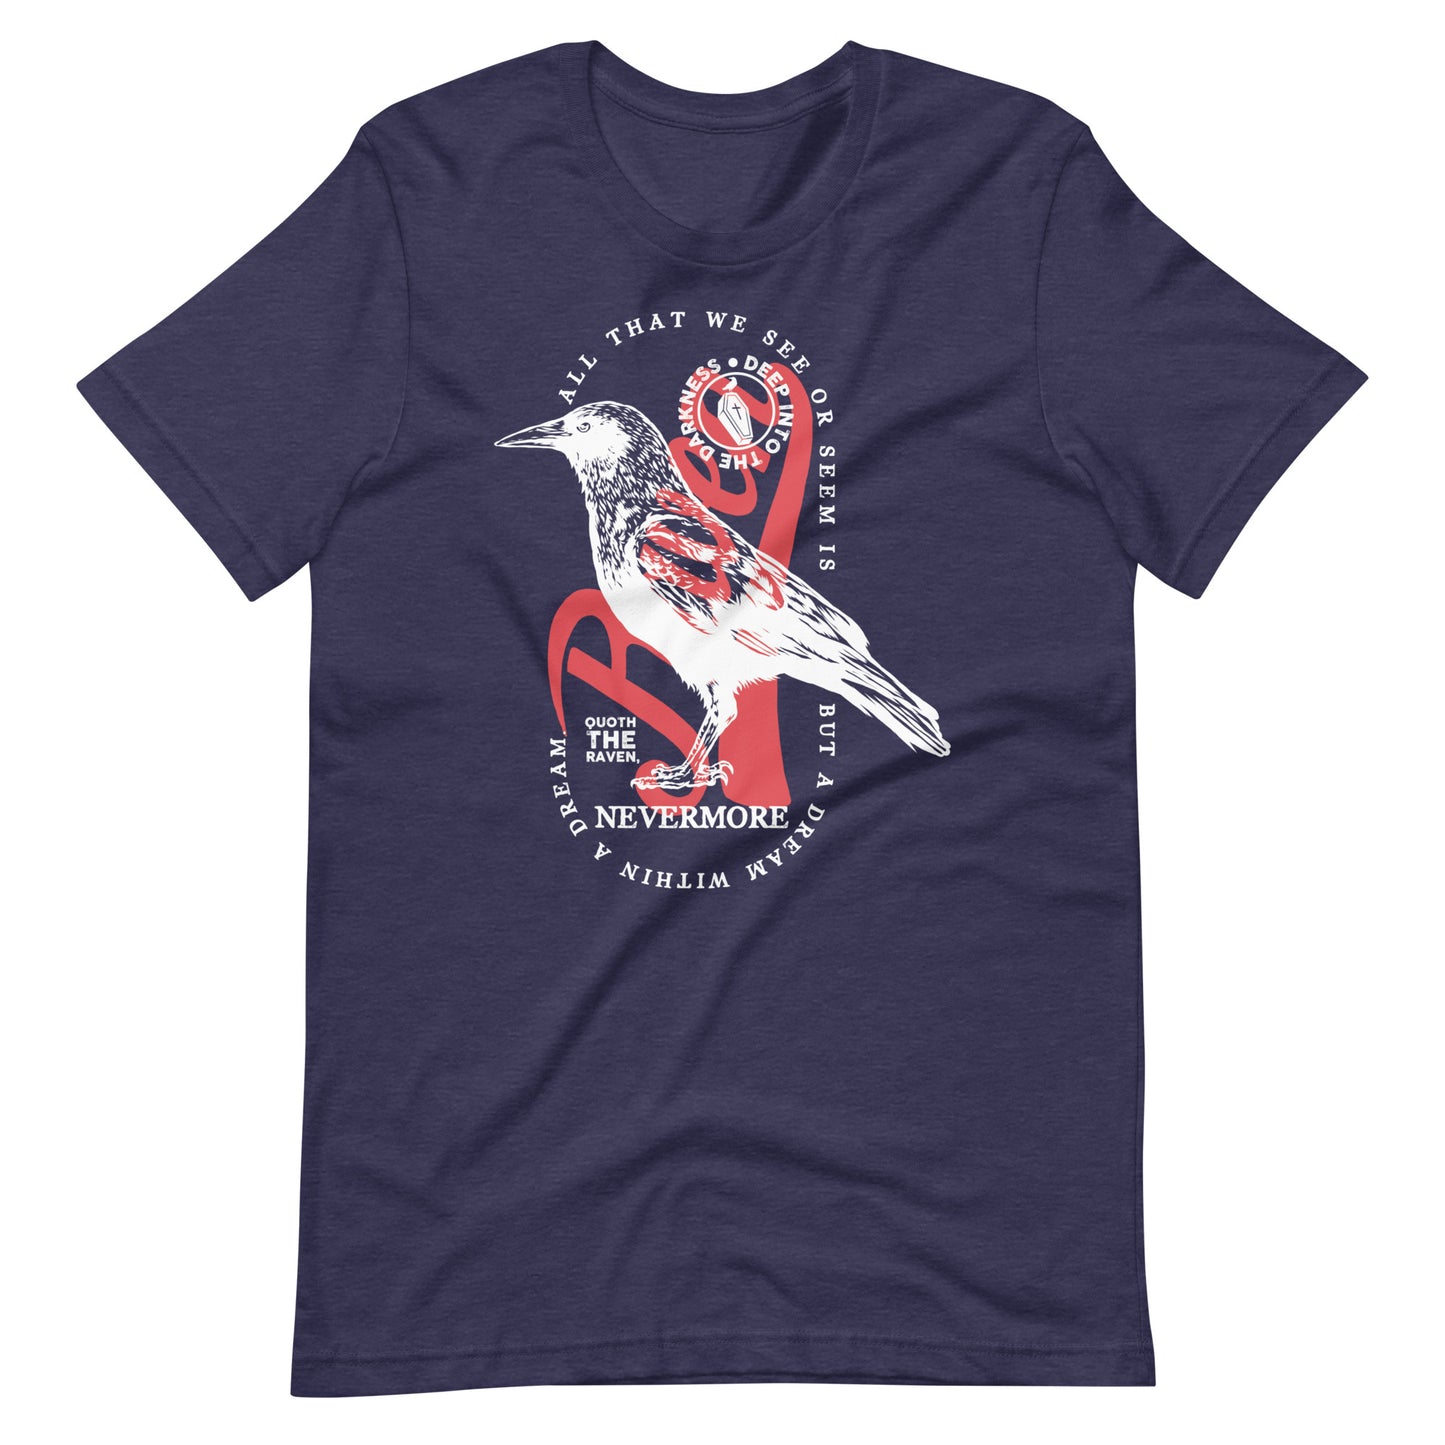 A Dream Within a Dream - Men's t-shirt - Heather Midnight Navy Front